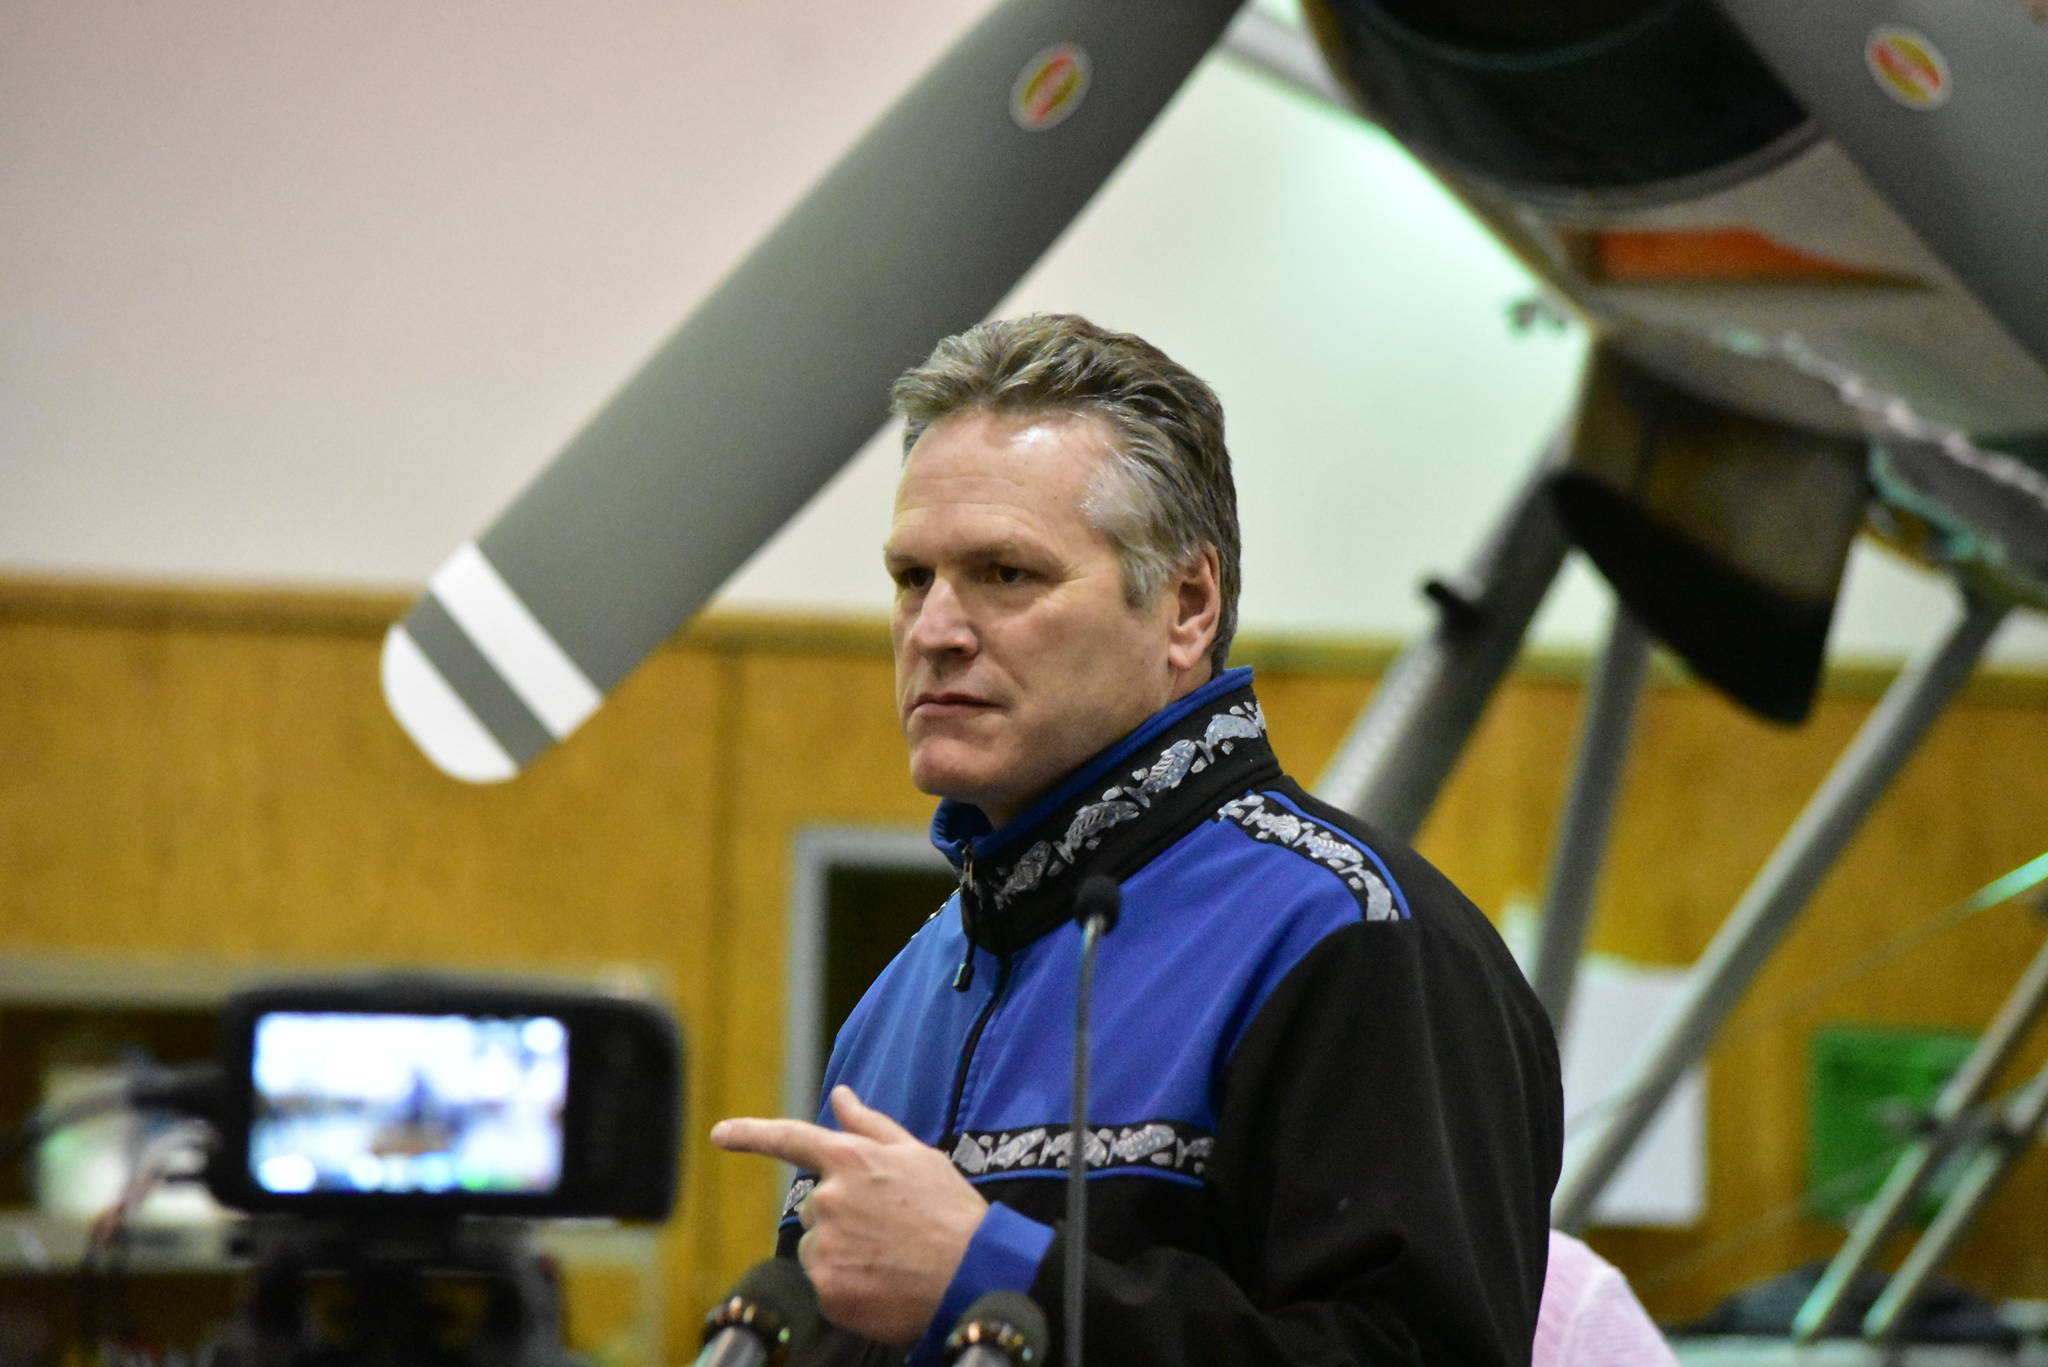 Gov. Mike Dunleavy speaks at a press conference promoting tourism on April 9, 2021. Dunleavy posted a video to social media saying he had received a COVID-19 vaccine, and urged Alaskans to do the same. (Peter Segall / Juneau Empire file)